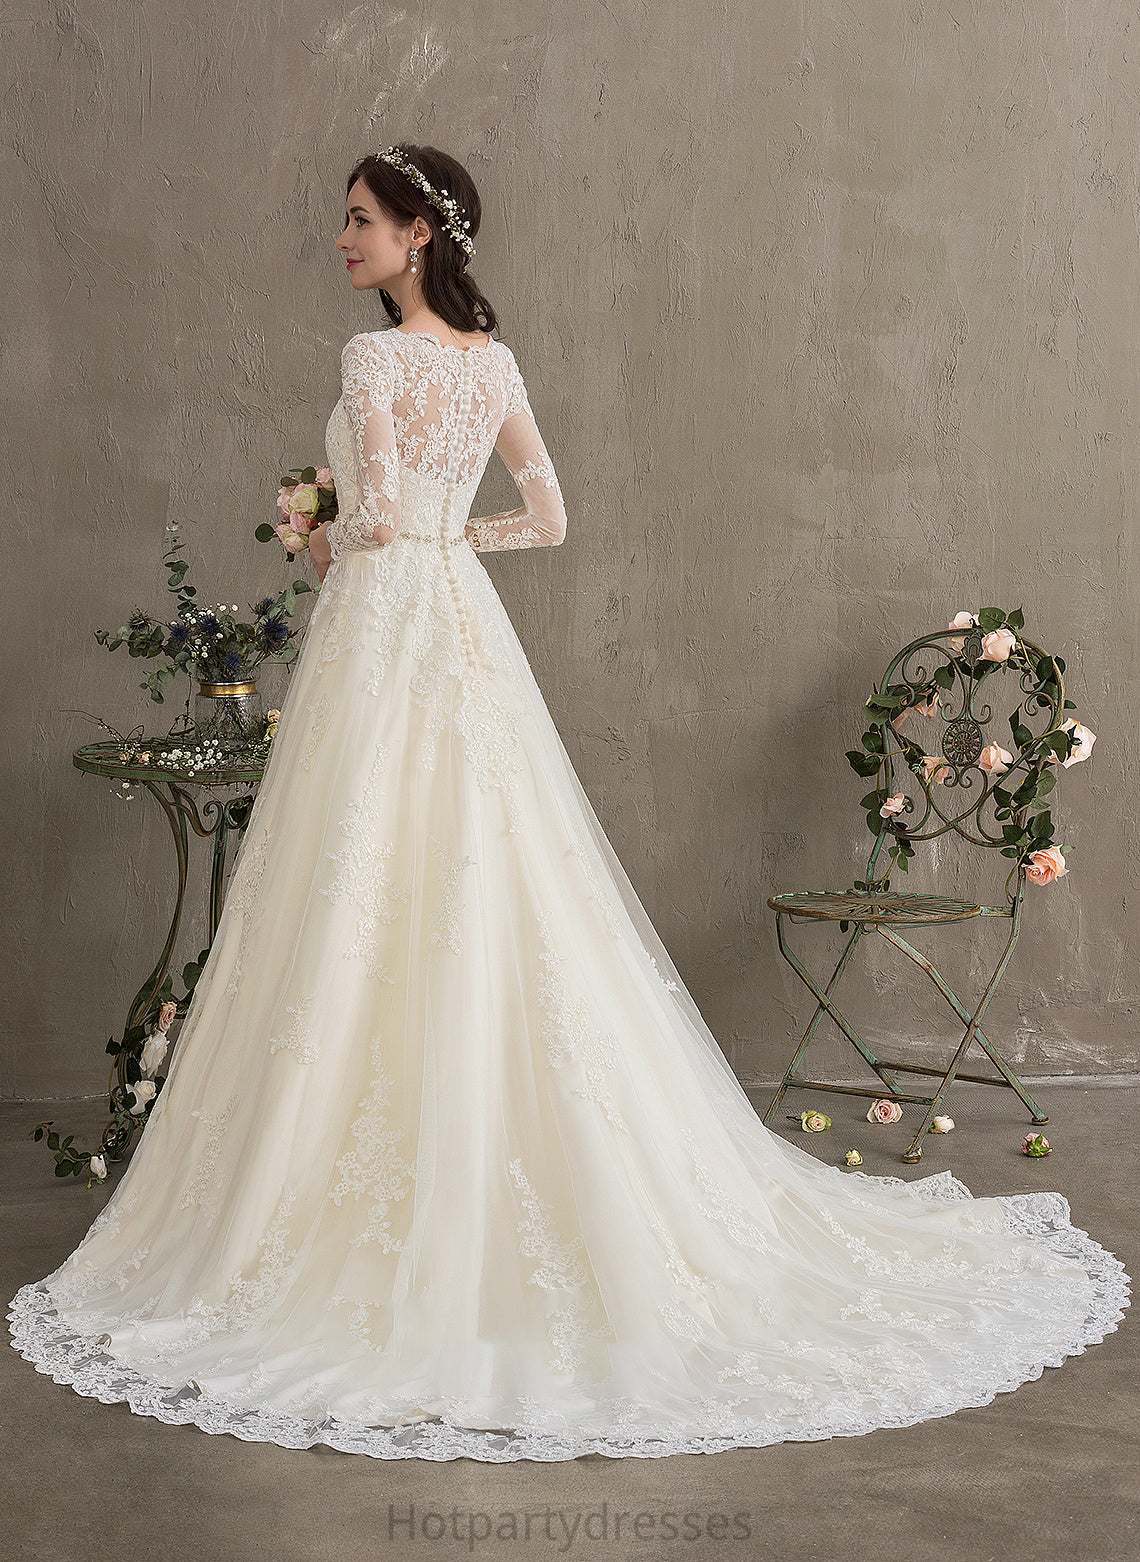 Tulle Ball-Gown/Princess Wedding Wedding Dresses With Chapel Bianca Beading Dress Sequins V-neck Train